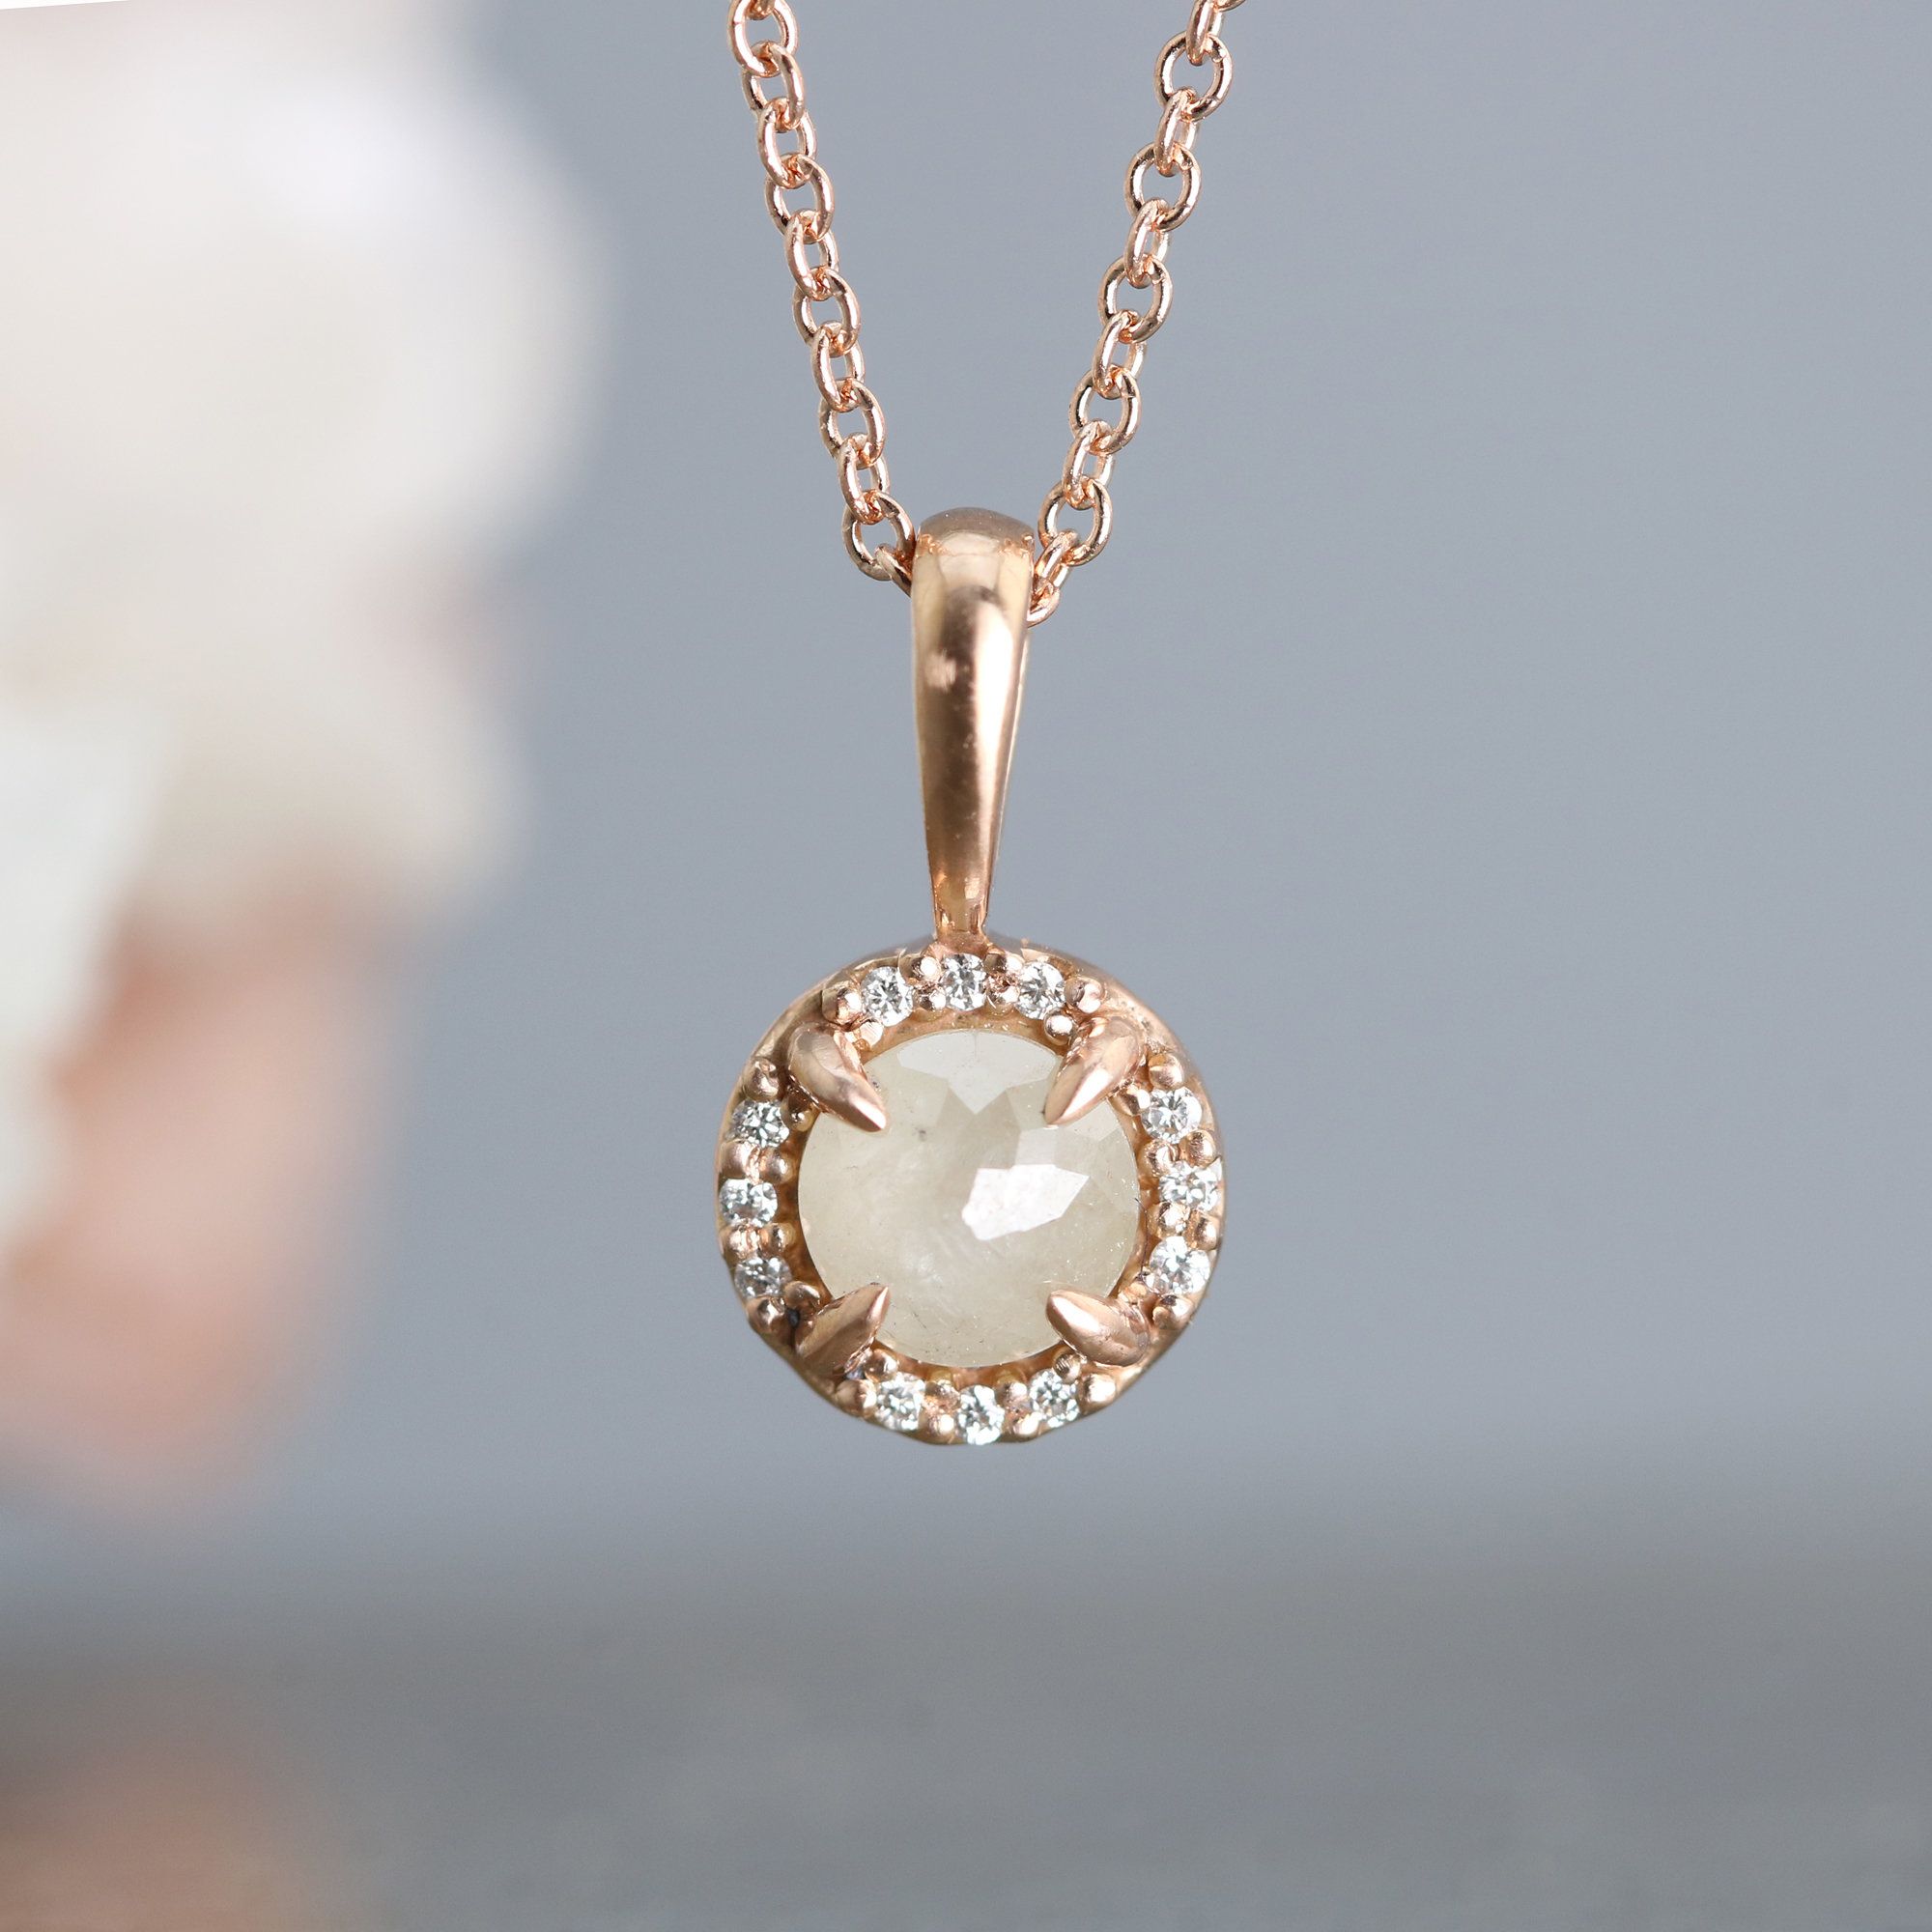 Rose Gold Halo Pendant Necklacesarah Hood (gold & Stone Necklace) |  Artful Home Intended For Recent Oval Sparkle Halo Pendant Necklaces (View 10 of 25)